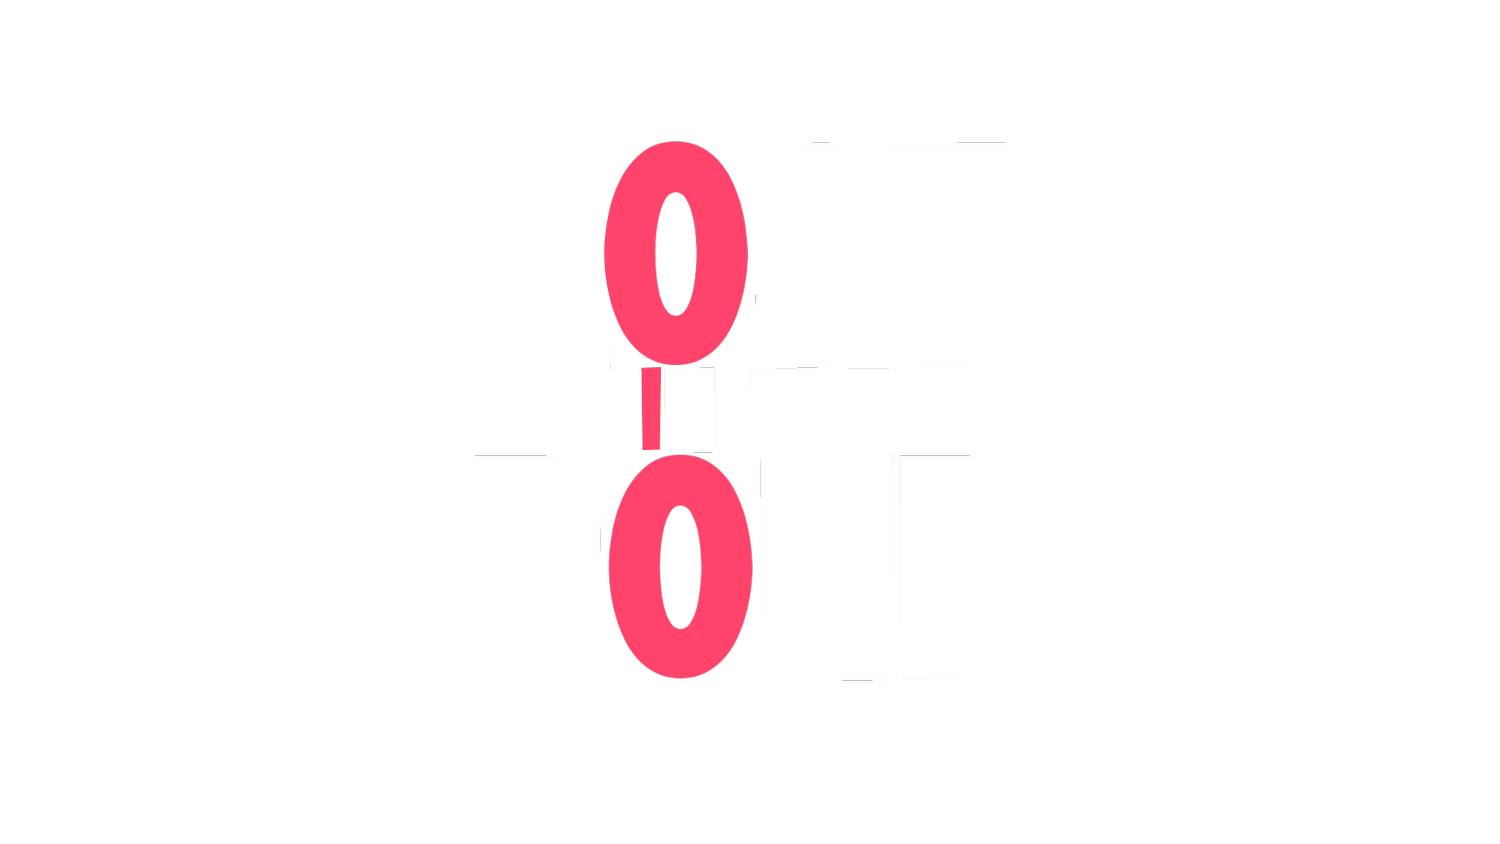 Lost in the Pond